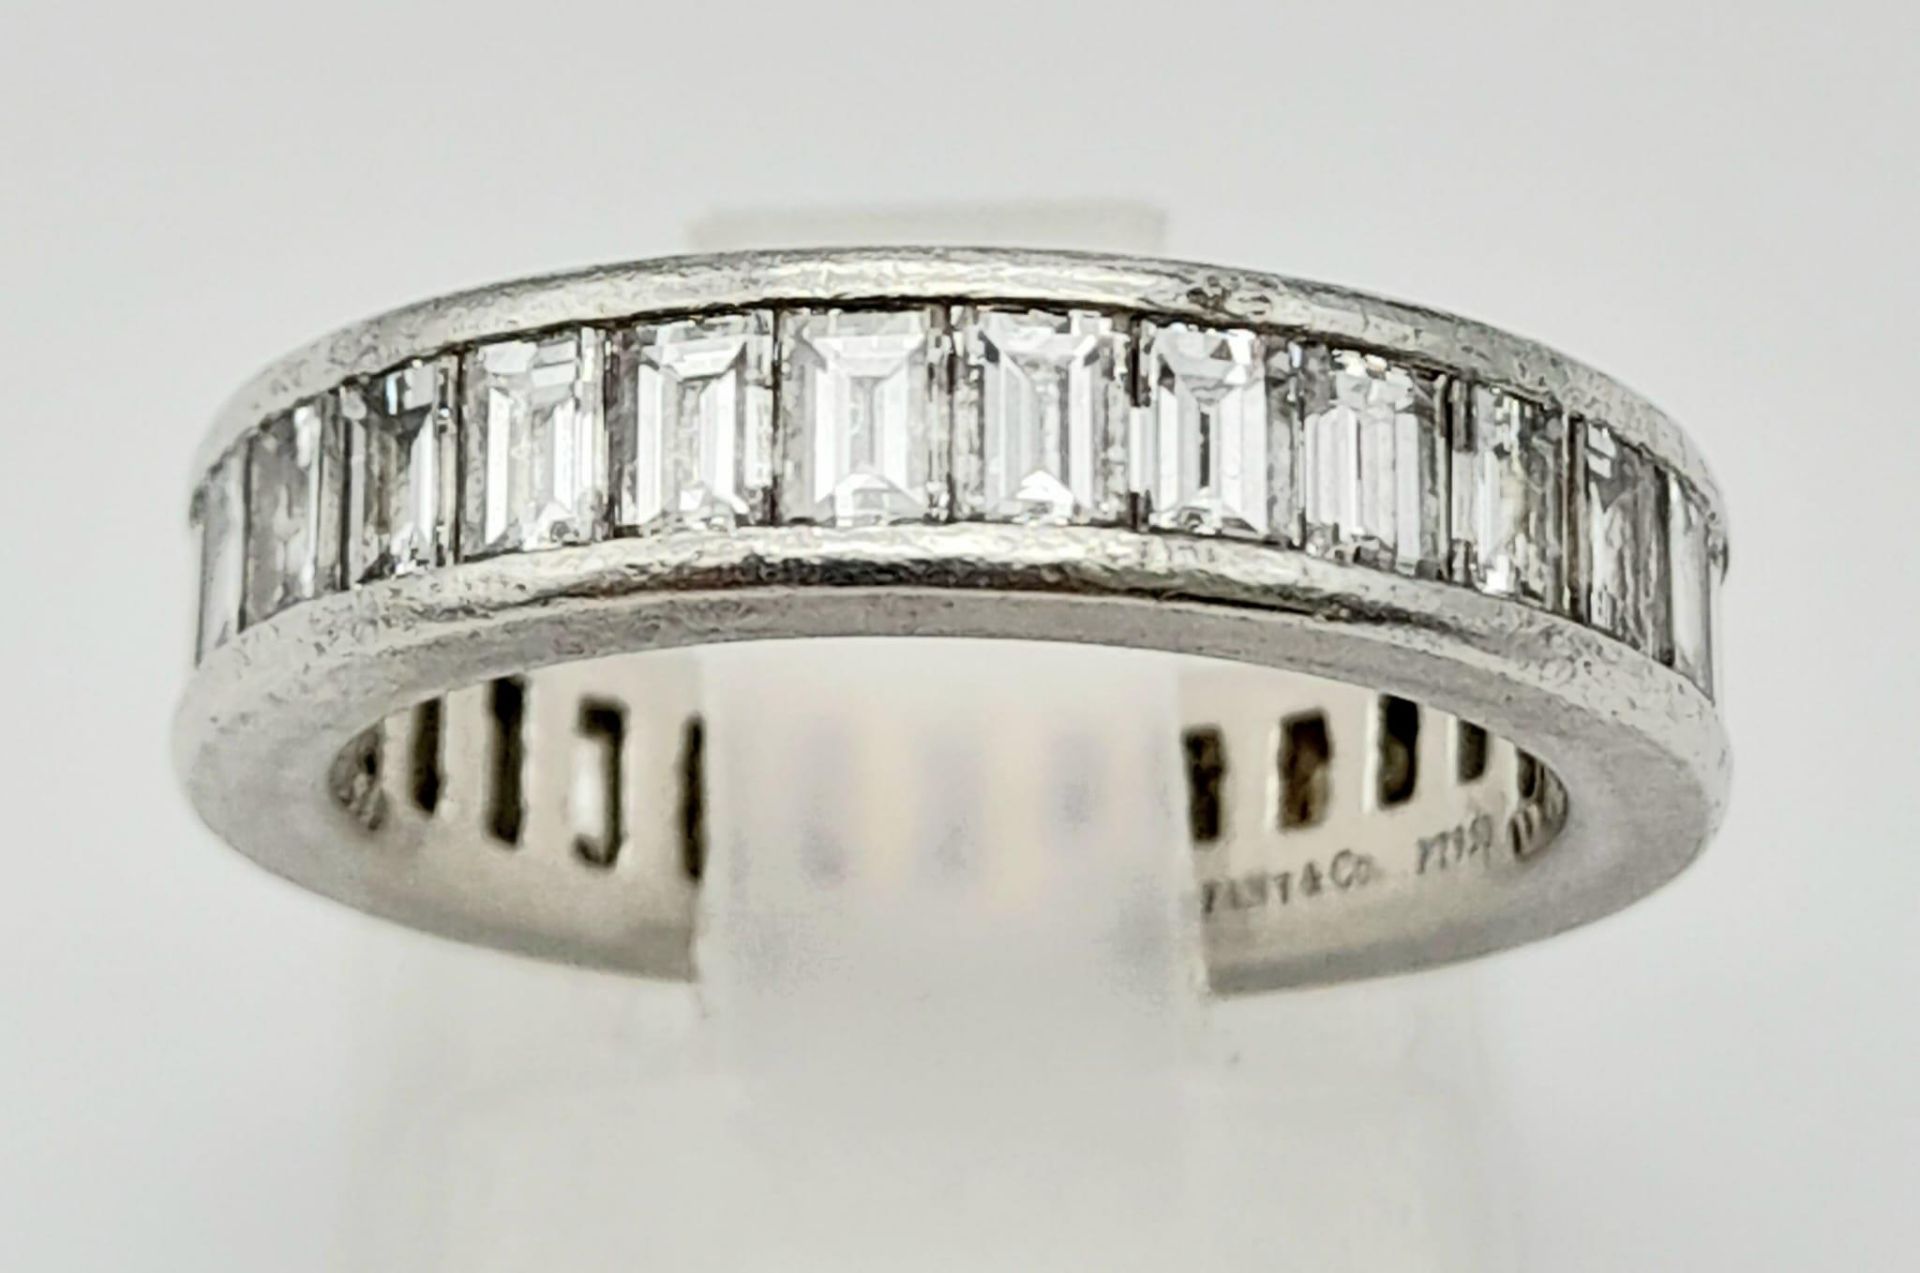 A Tiffany and Co Platinum and Diamond Full Eternity Ring. 950 platinum with full circle of high